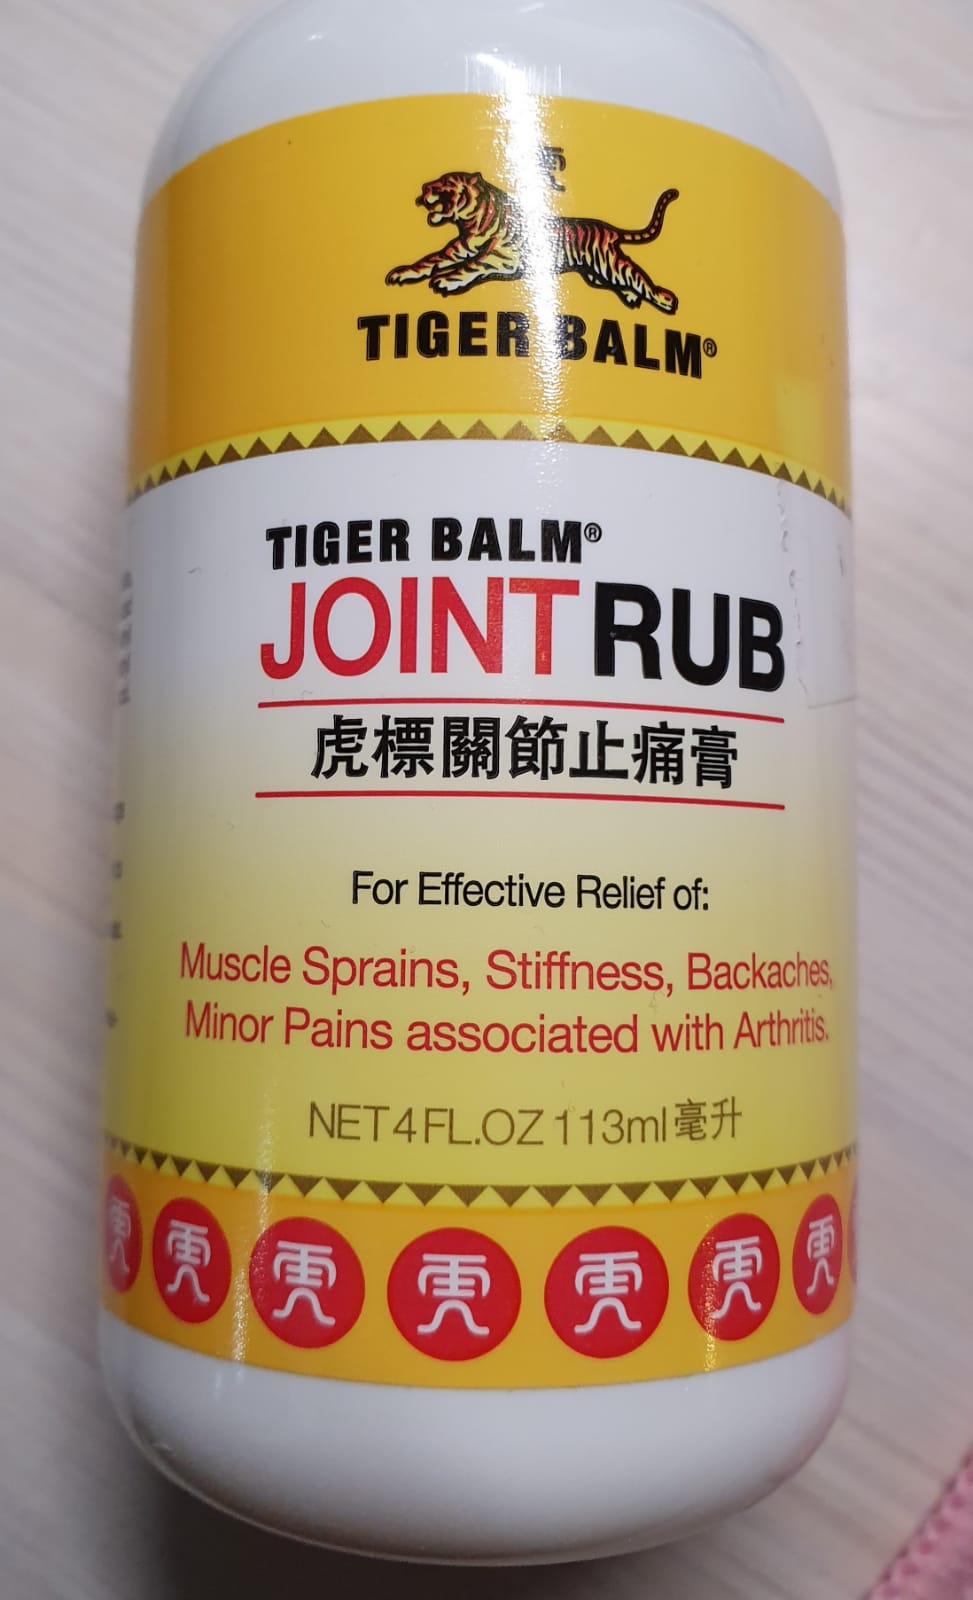 TIGER BALM JOINT RUB The efficacy of Tiger Balm in a unique formulation developed for arthritis pain relief, targeting joint pains and stiffness. Containing glucosamine, chondroitin and MSM, this non-greasy lotion gives a warming sensation for quick relief from arthritis and joint pain. With its convenient pump, it allows arthritis sufferers to dispense the product easily anytime, anywhere. Relieves joint pains from arthritis, muscle sprains and stiffness Beneficial for joint pains Non-greasy formula for all skin types 113ml convenient pump bottle